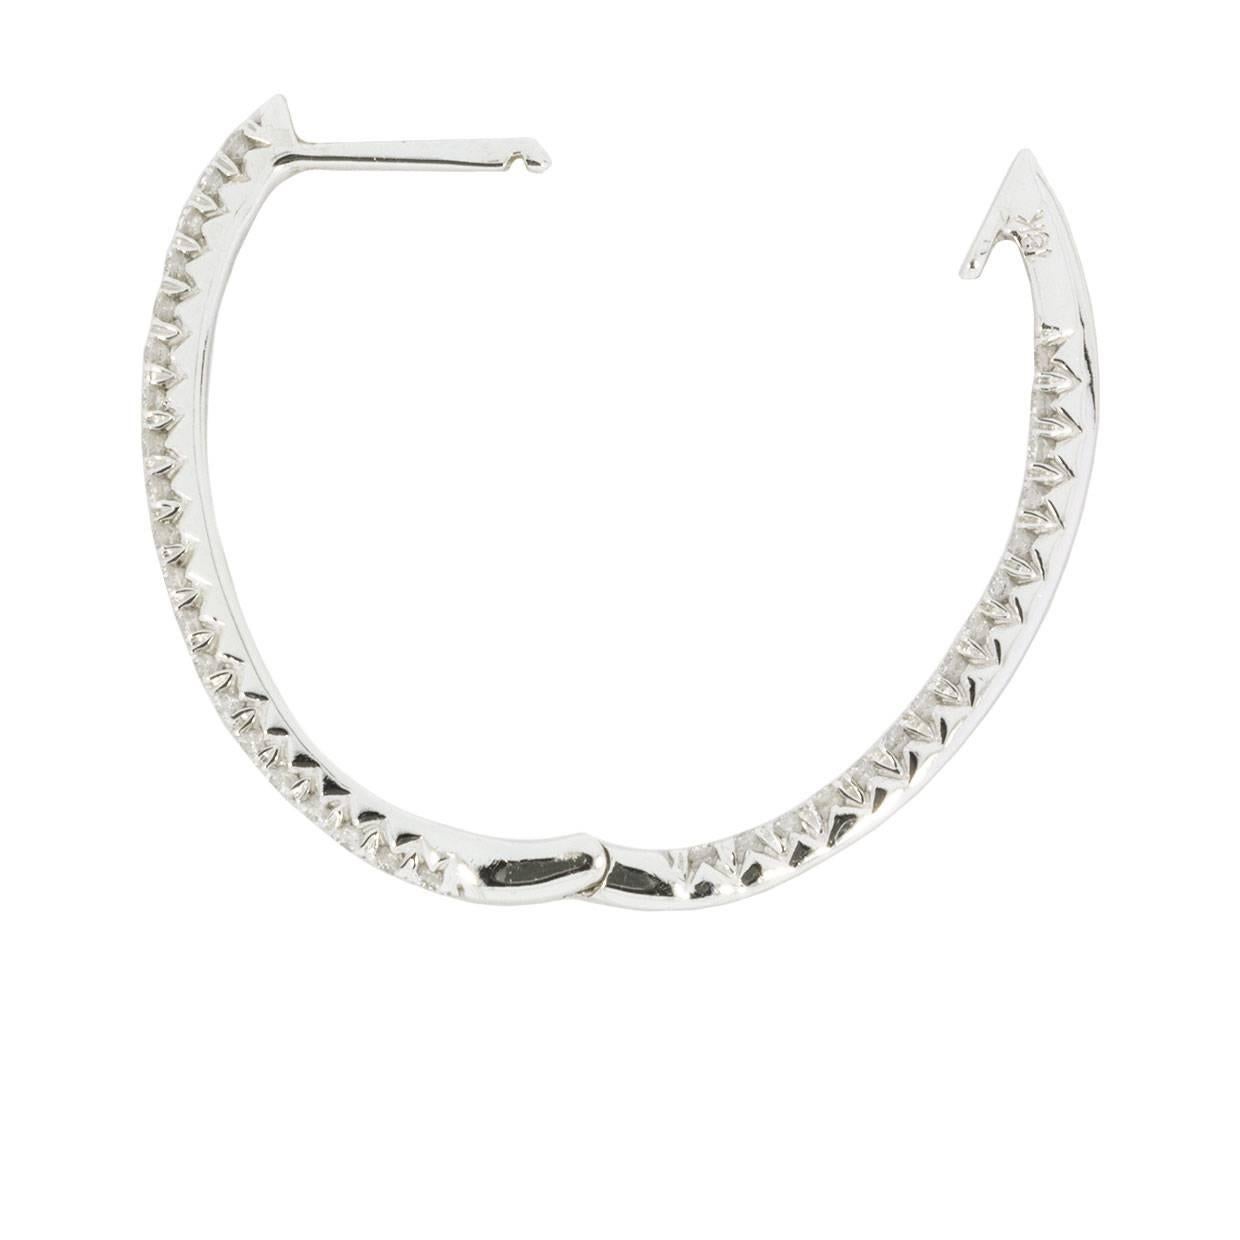 Round Cut White Gold 0.72 Carat Shared Prong Inside-Out Diamond Hoop Earrings